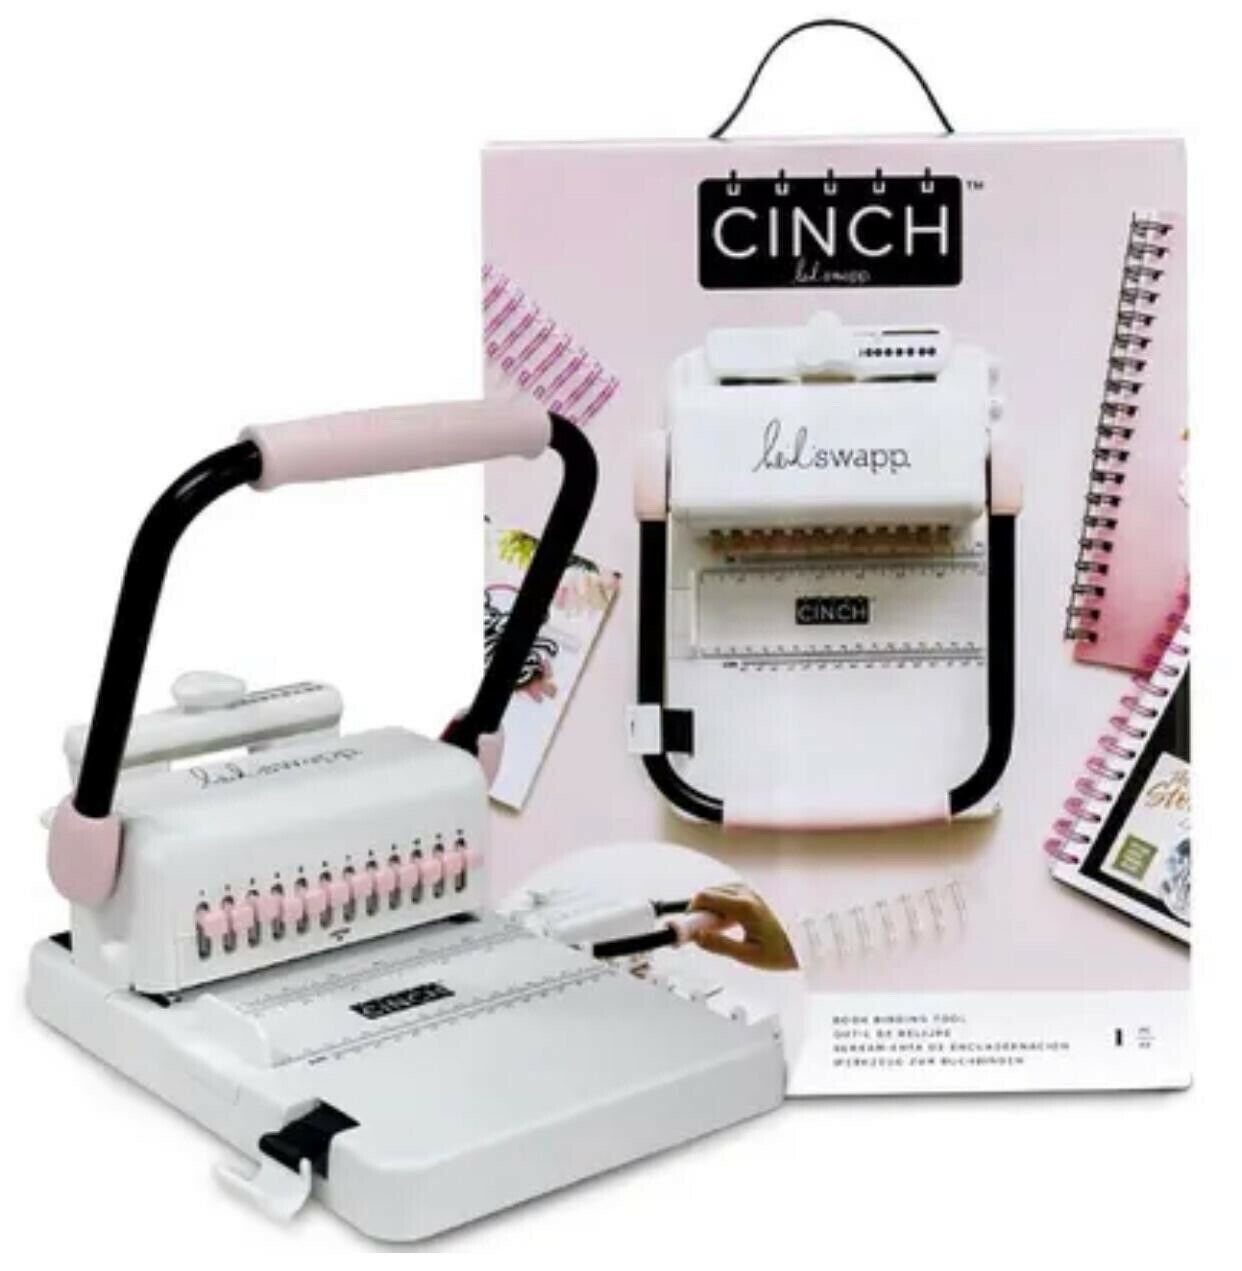 We R Makers - Our Mini Cinch binding machine is mini but